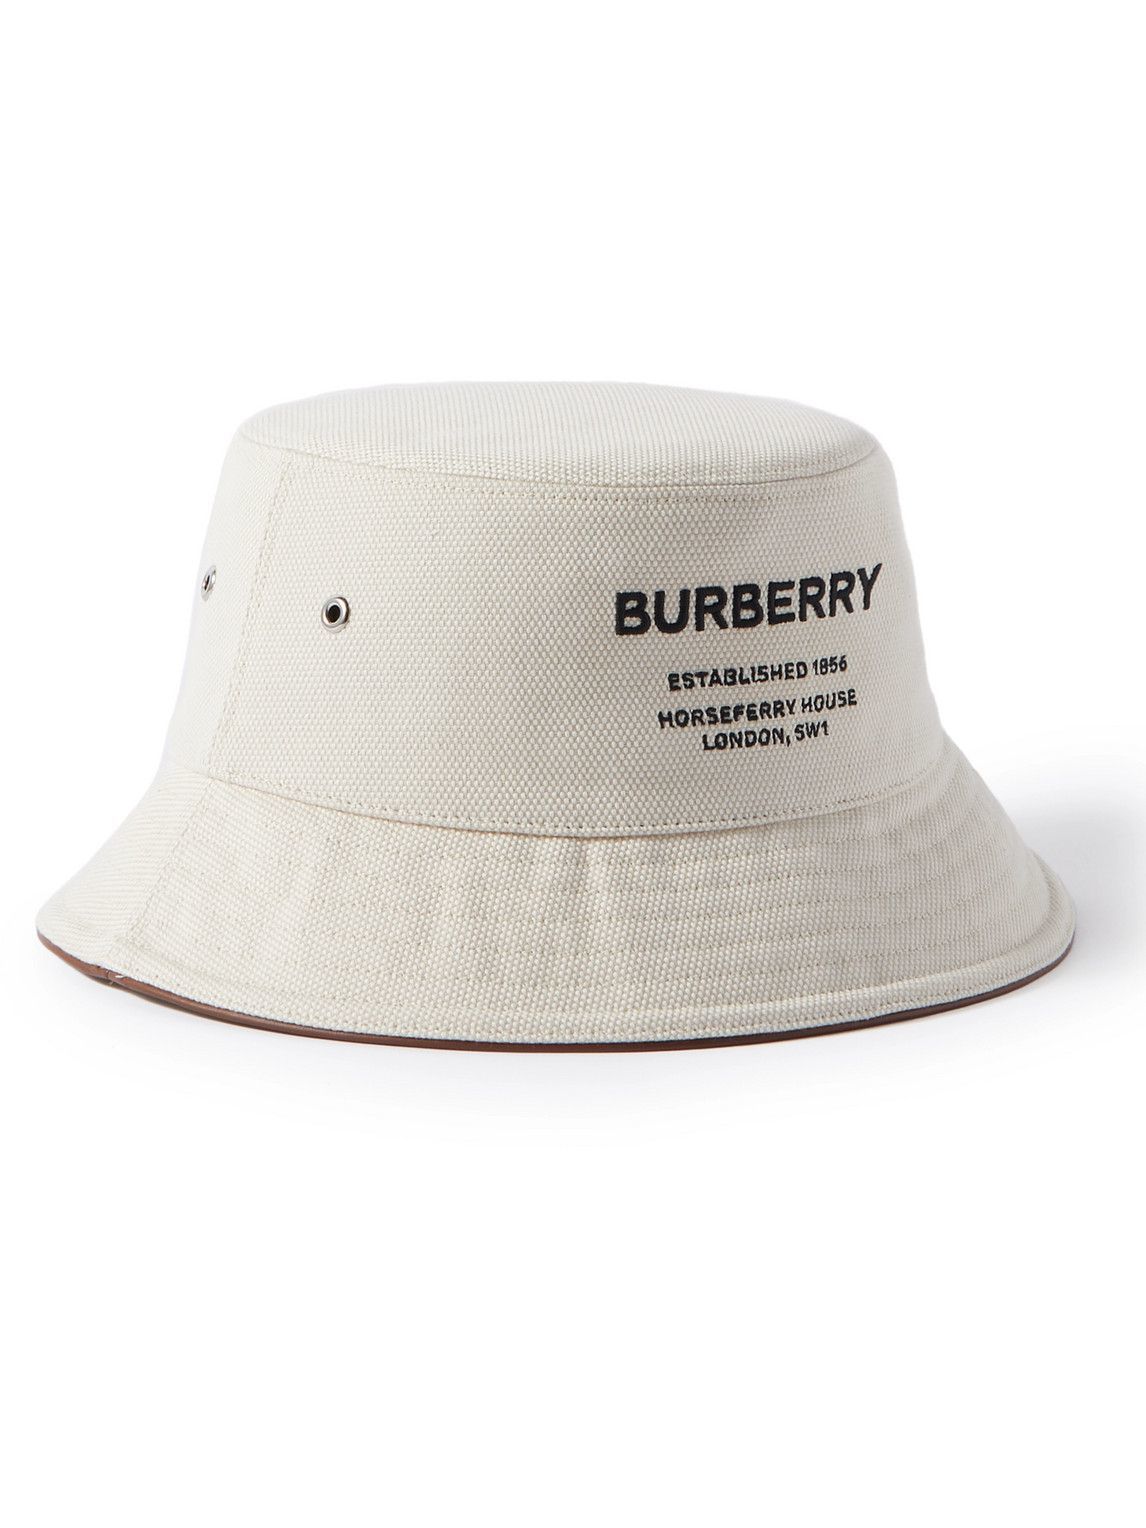 Burberry - Logo-Embroidered Leather-Trimmed Cotton-Canvas Bucket Hat -  Neutrals Burberry